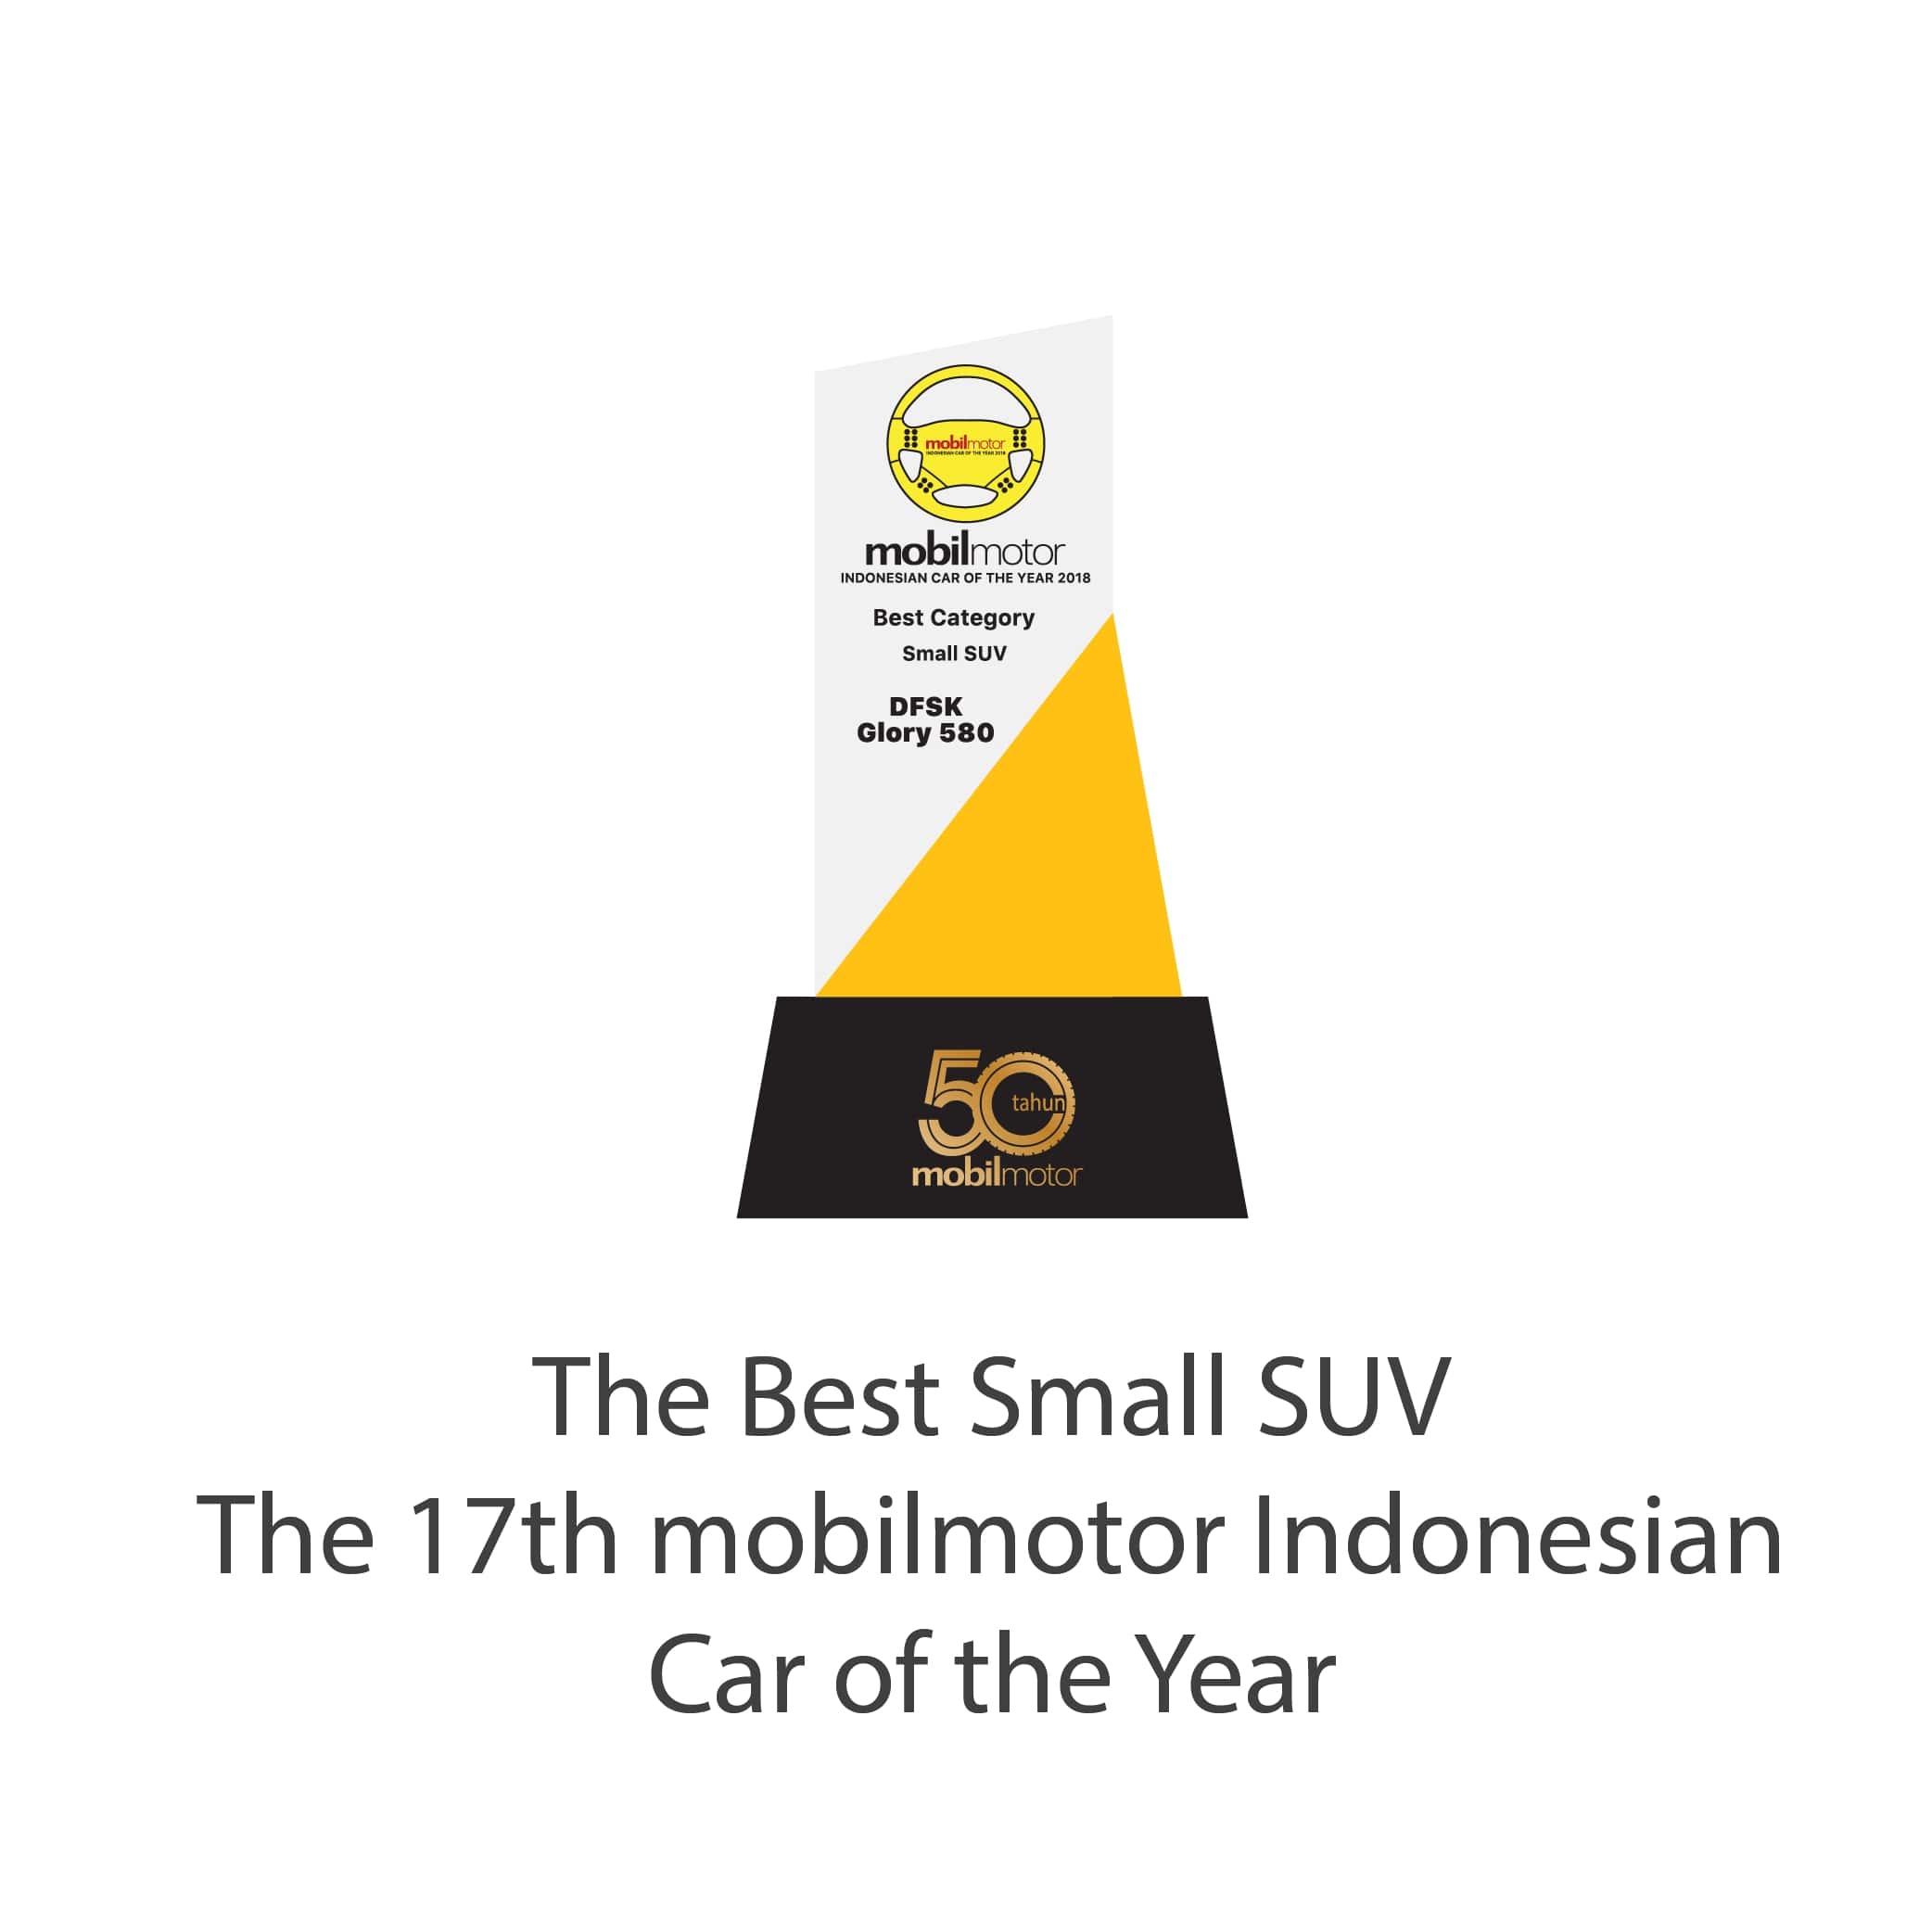 The Best Small SUV The 17th mobilmotor Indonesian Car of The Year 2018